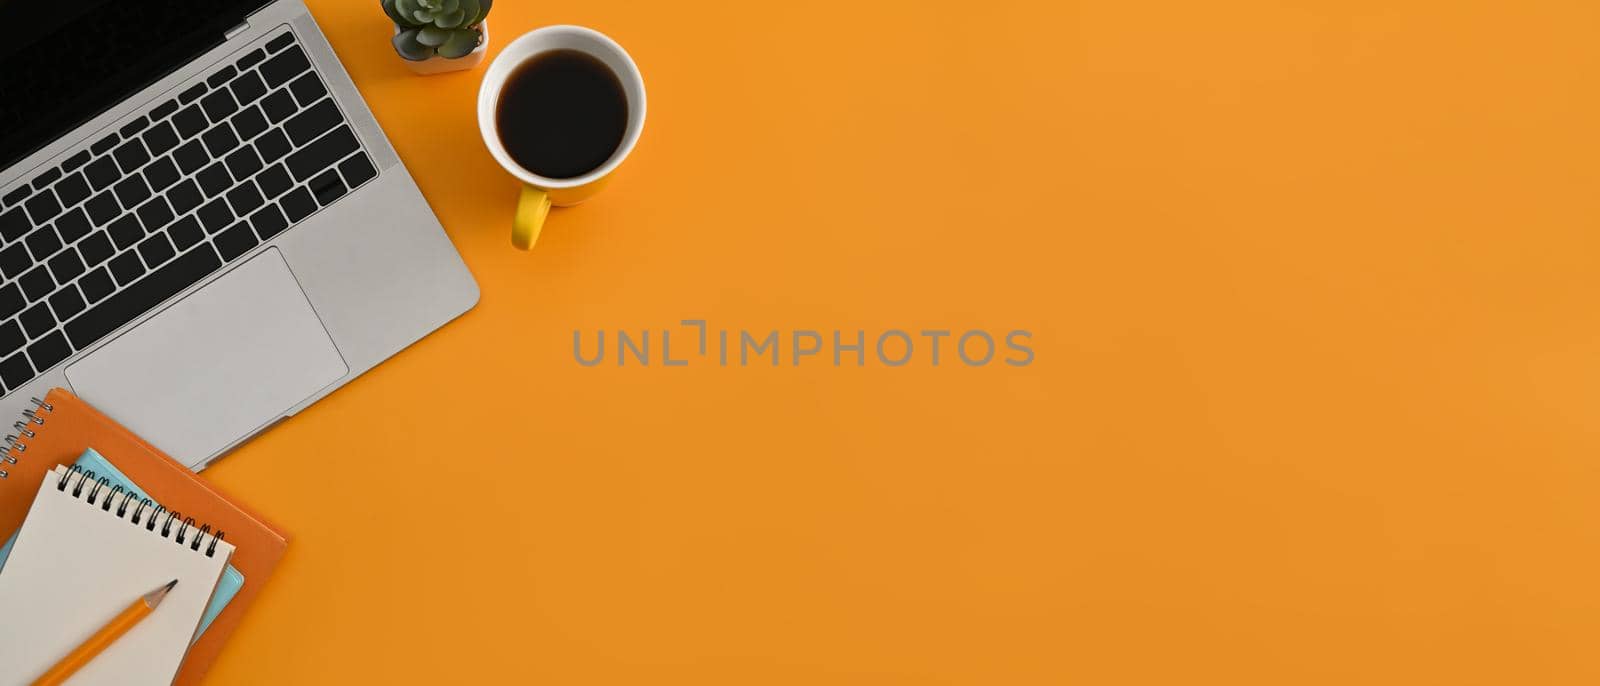 Computer laptop, coffee cup and notebook on yellow background with copy space. Horizontal photo, Top view. by prathanchorruangsak